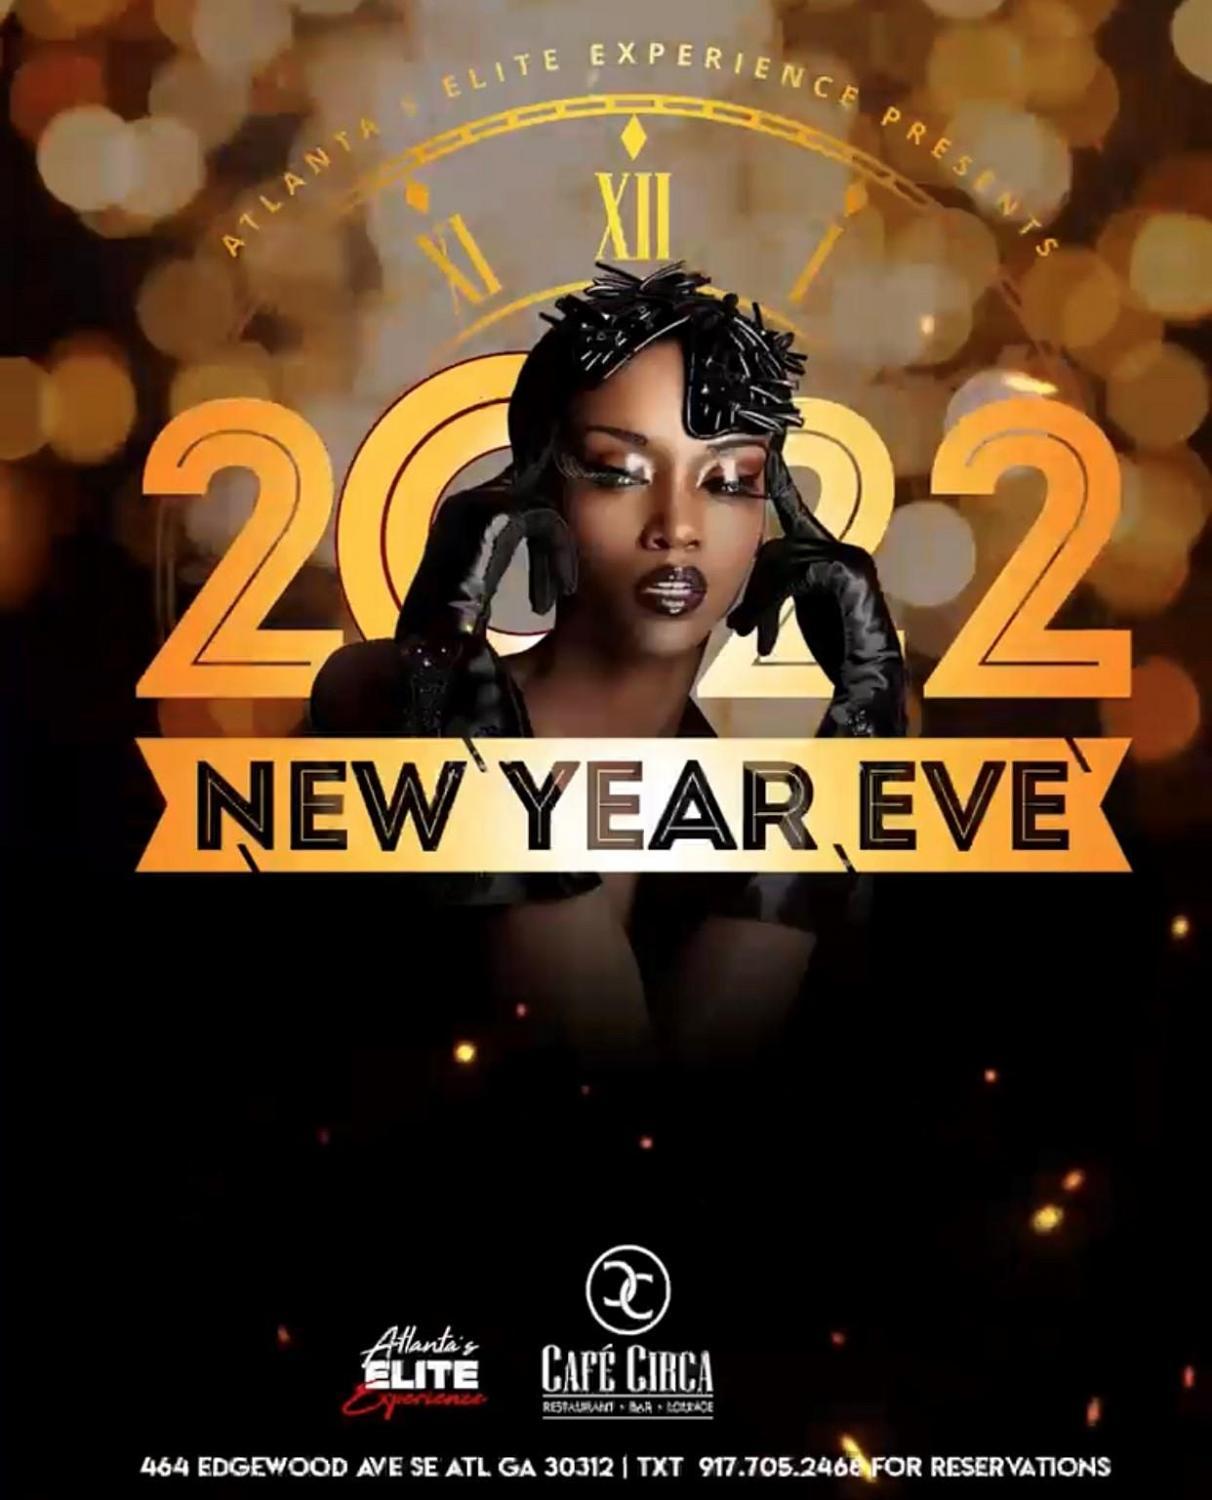 #1 NEW YEARS EVE ROOFTOP PARTY CAFE CIRCA YOU DO NOT WANT TO MISS THIS!!!